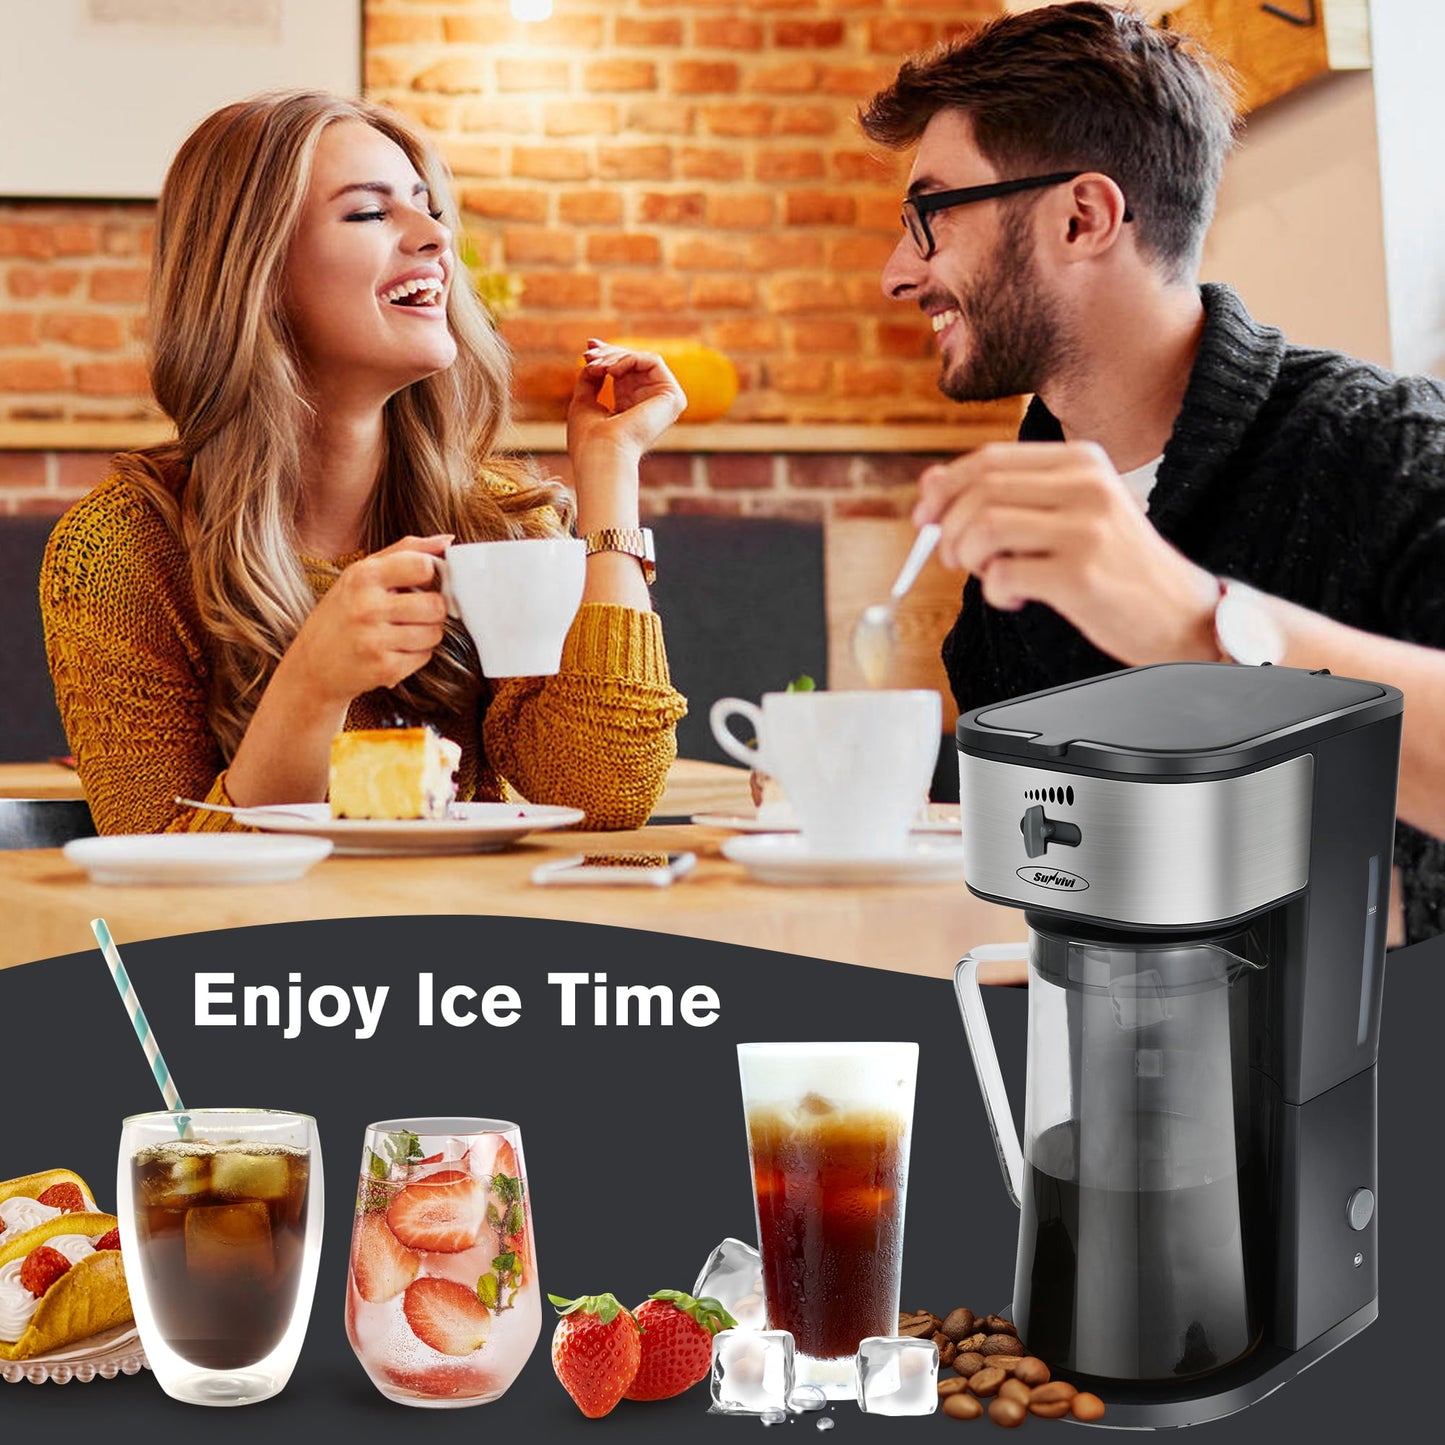 SUNVIVI 3 Quart Iced Tea Maker Iced Coffee Maker with Glass Pitcher for Hot/Cold Water,Iced Tea Coffee Maker with Strength Selector,Stainless Steel, Black